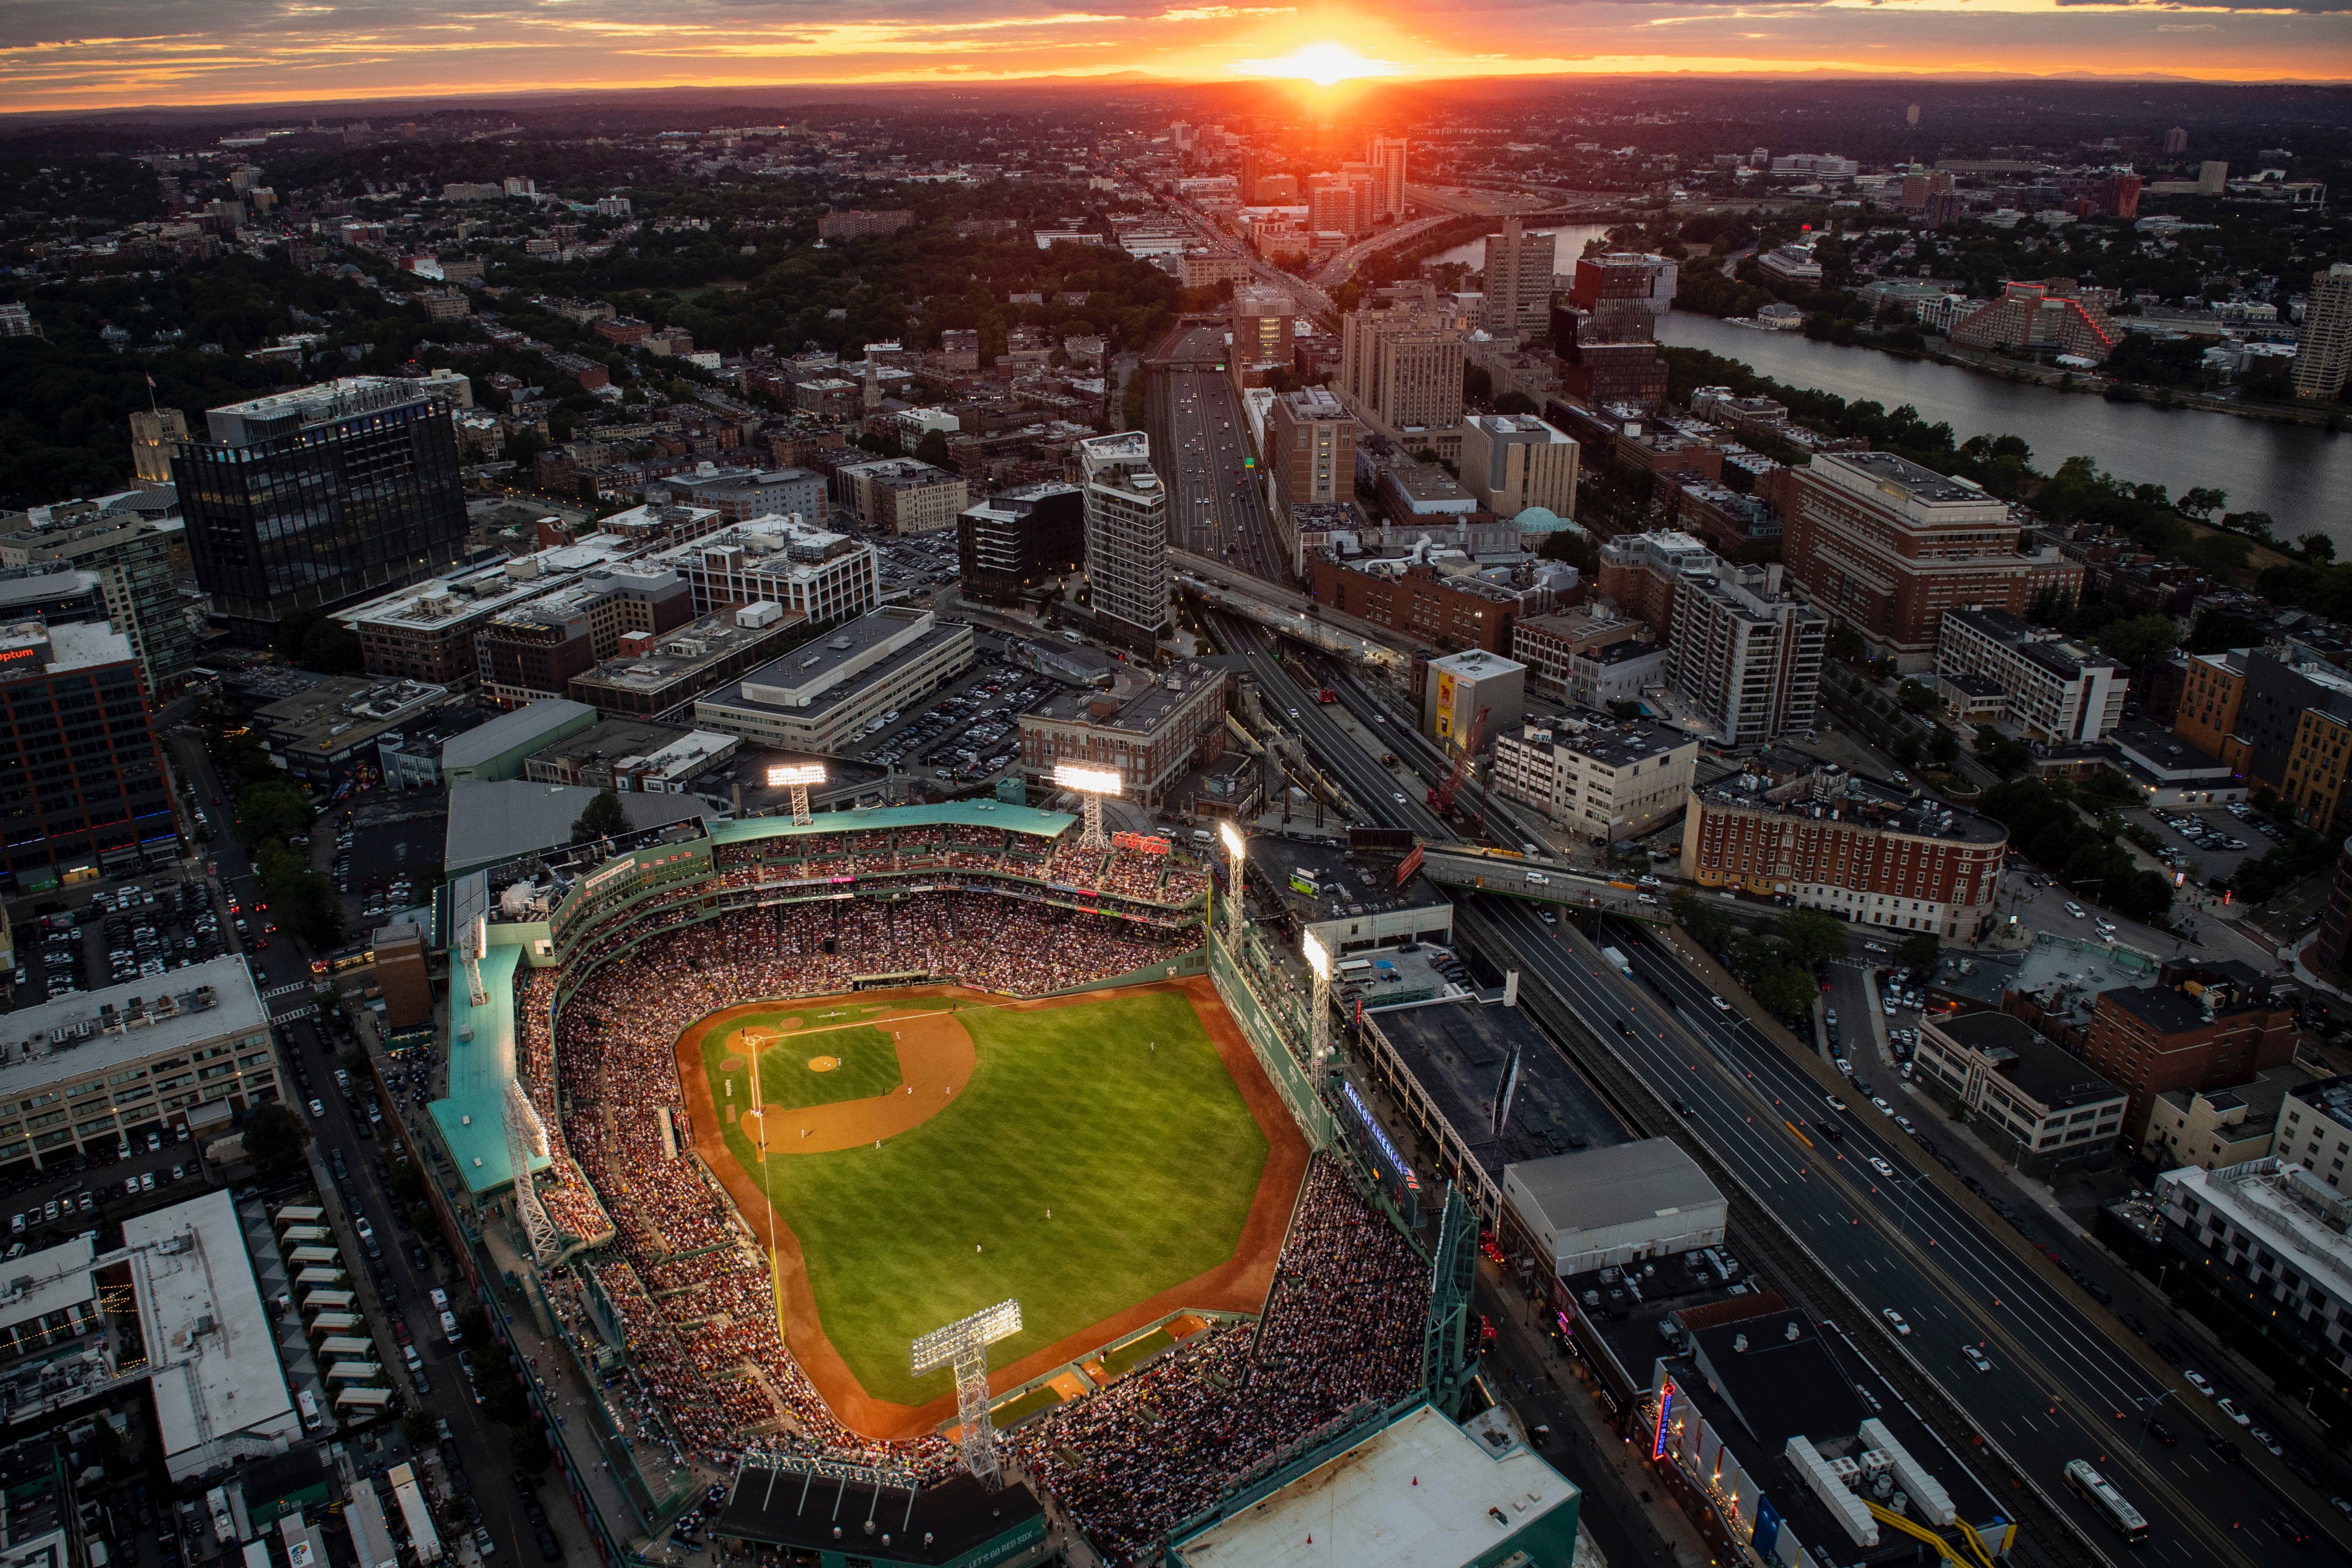 A wide shot of Fenway Park and the surrounding Boston neighborhoods and Charles River from a helicopter above the city at sunset. The sun sets on the horizon with the lights on at a sold-out Fenway Park during the game on 8/13/22. 